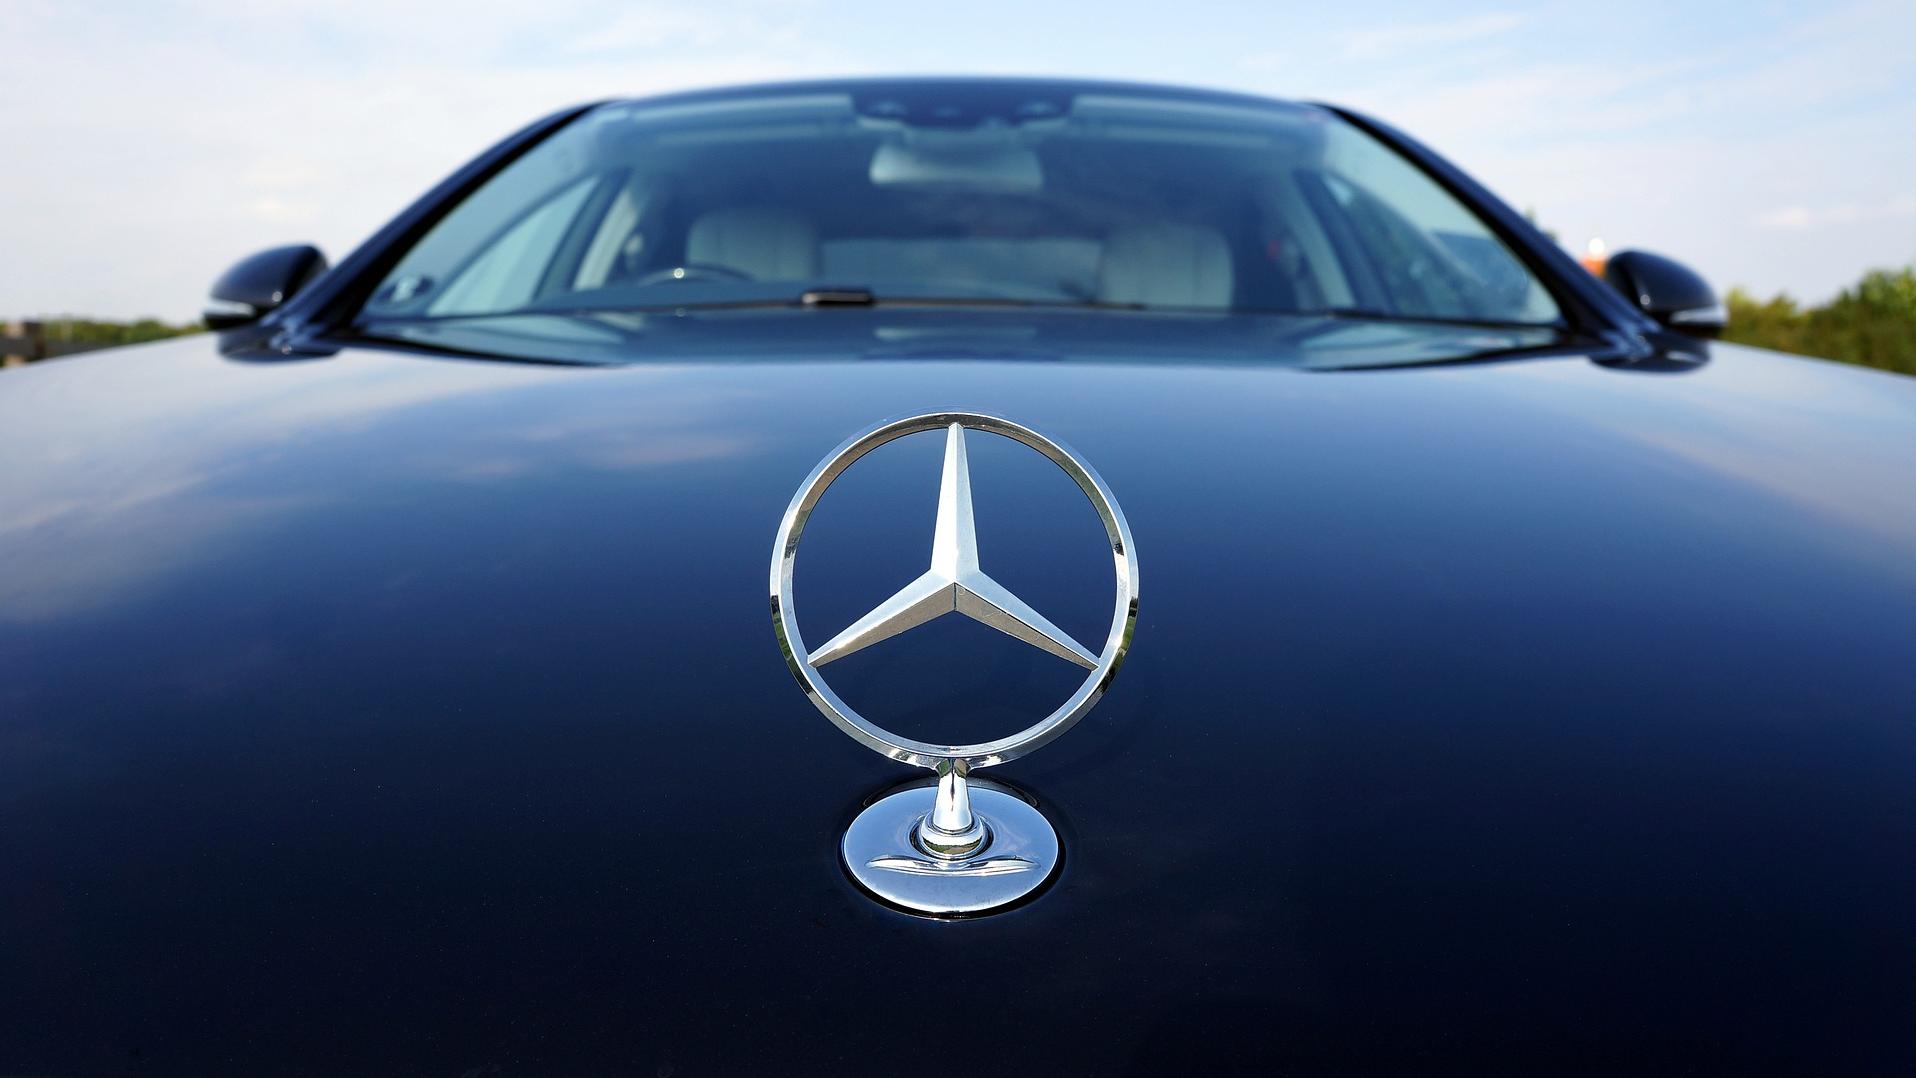 With Retail of the Future, prospective buyers will have a bigger pool of Mercedes-Benz models to choose from. Image: Mikes-Photography from Pixabay 